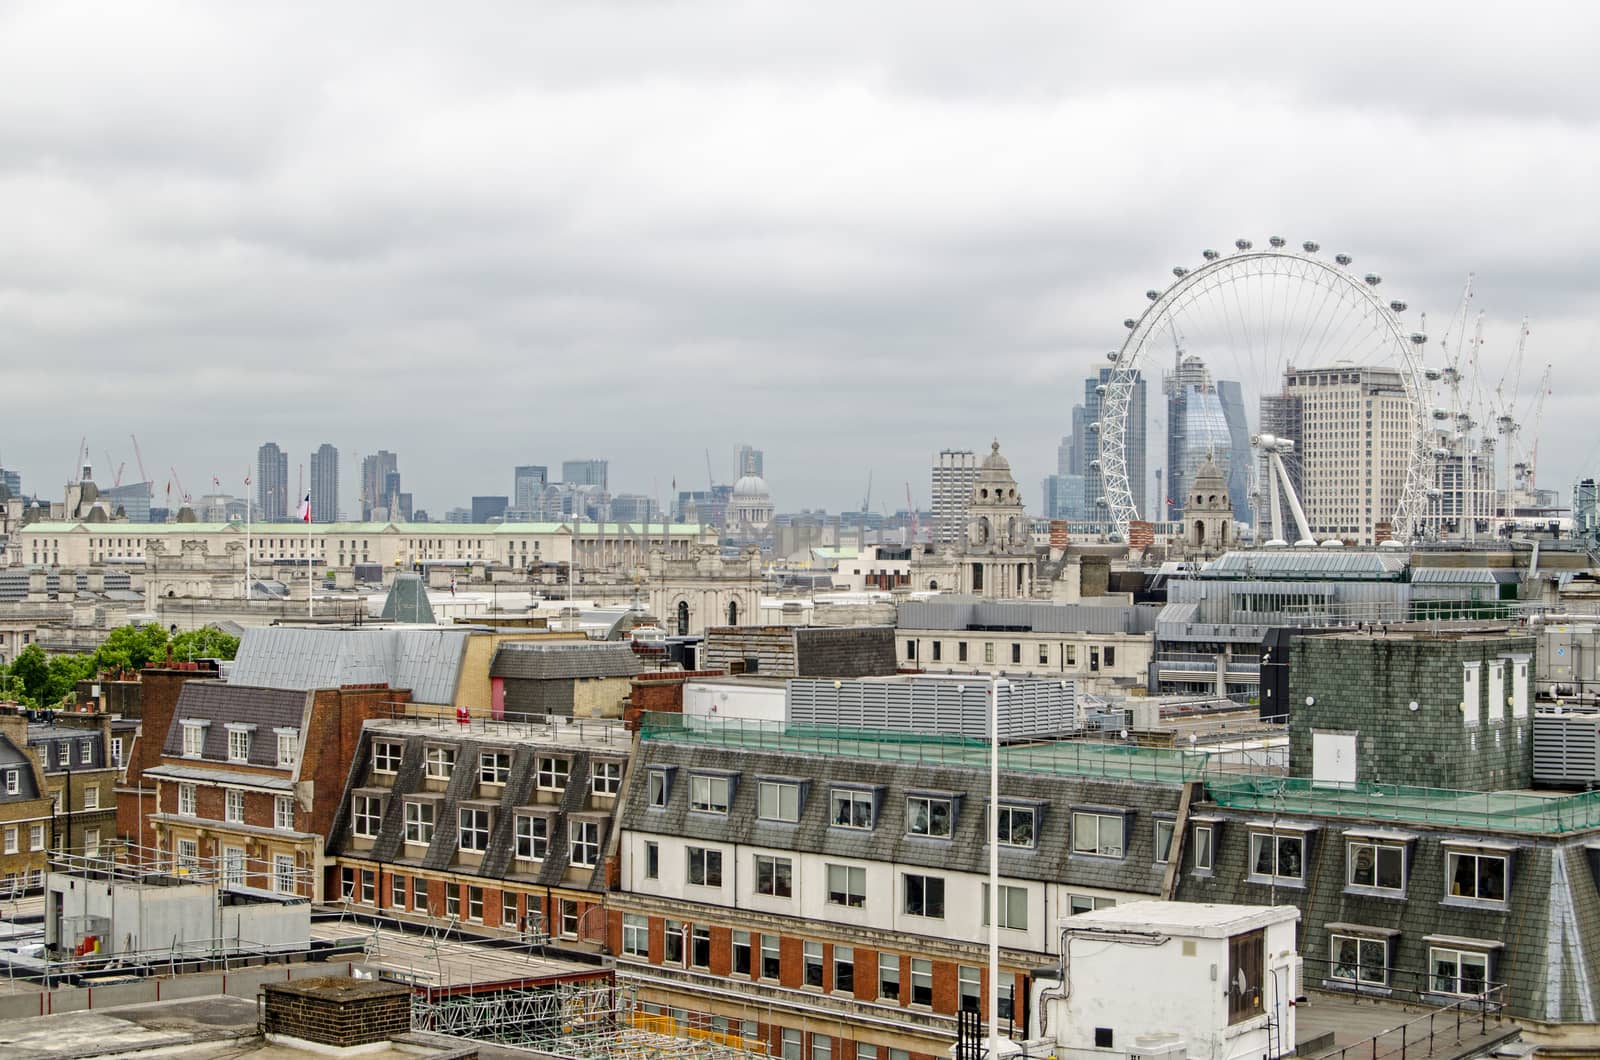 View across the rooftops of Westminster towards the South Bank and City of London on a cloudy summer day.  View includes St Paul's Cathedral, the Ministry of Defence, the Barbican and the Shell building.